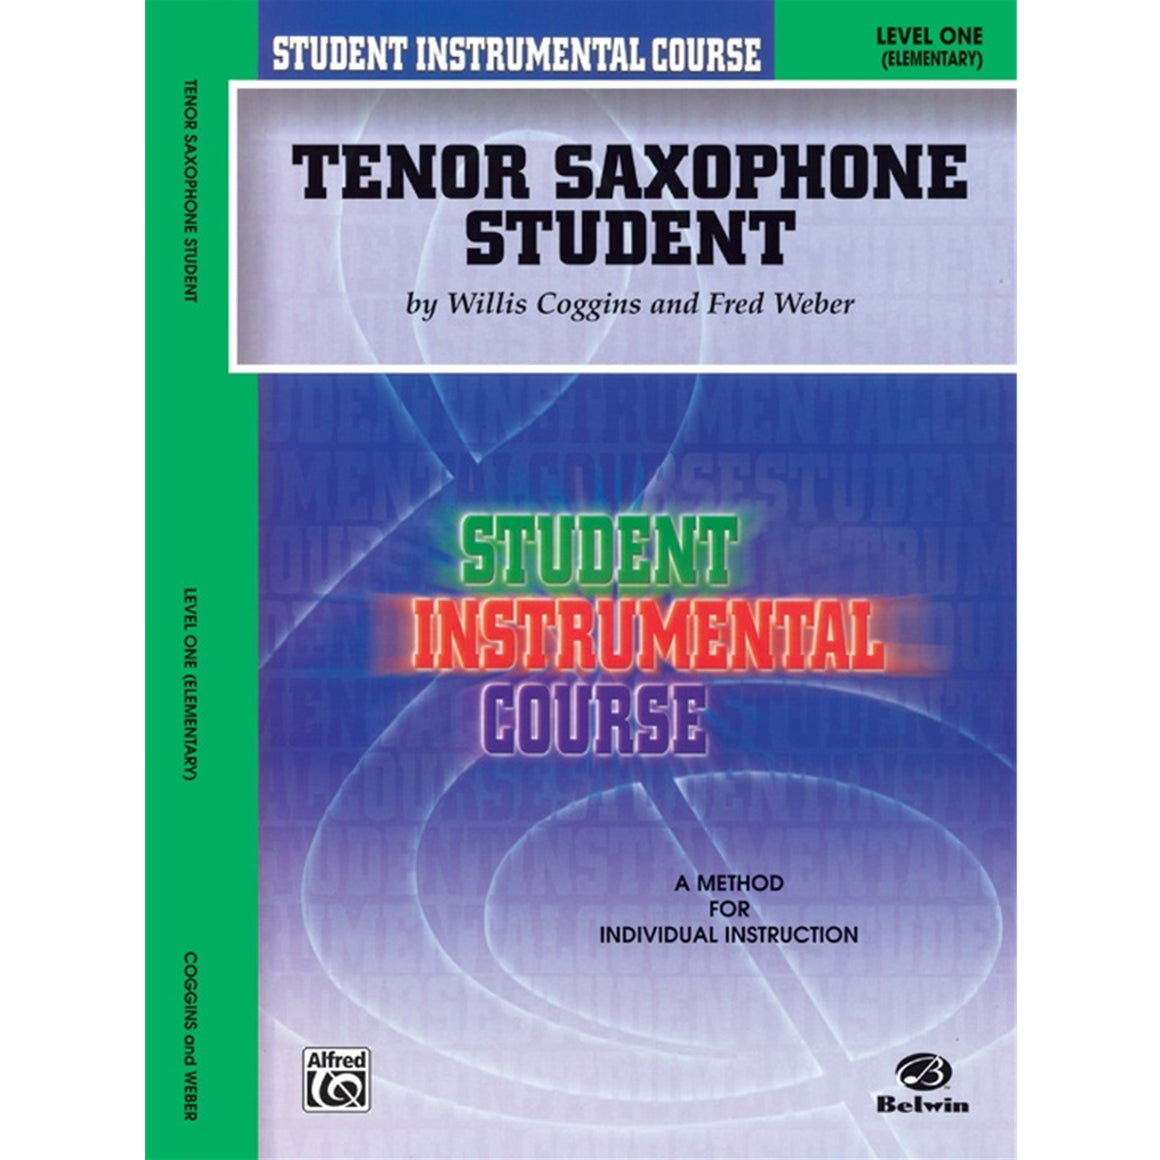 ALFRED 00BIC00136A Student Instrumental Course: Tenor Saxophone Student, Level I [Saxophone]